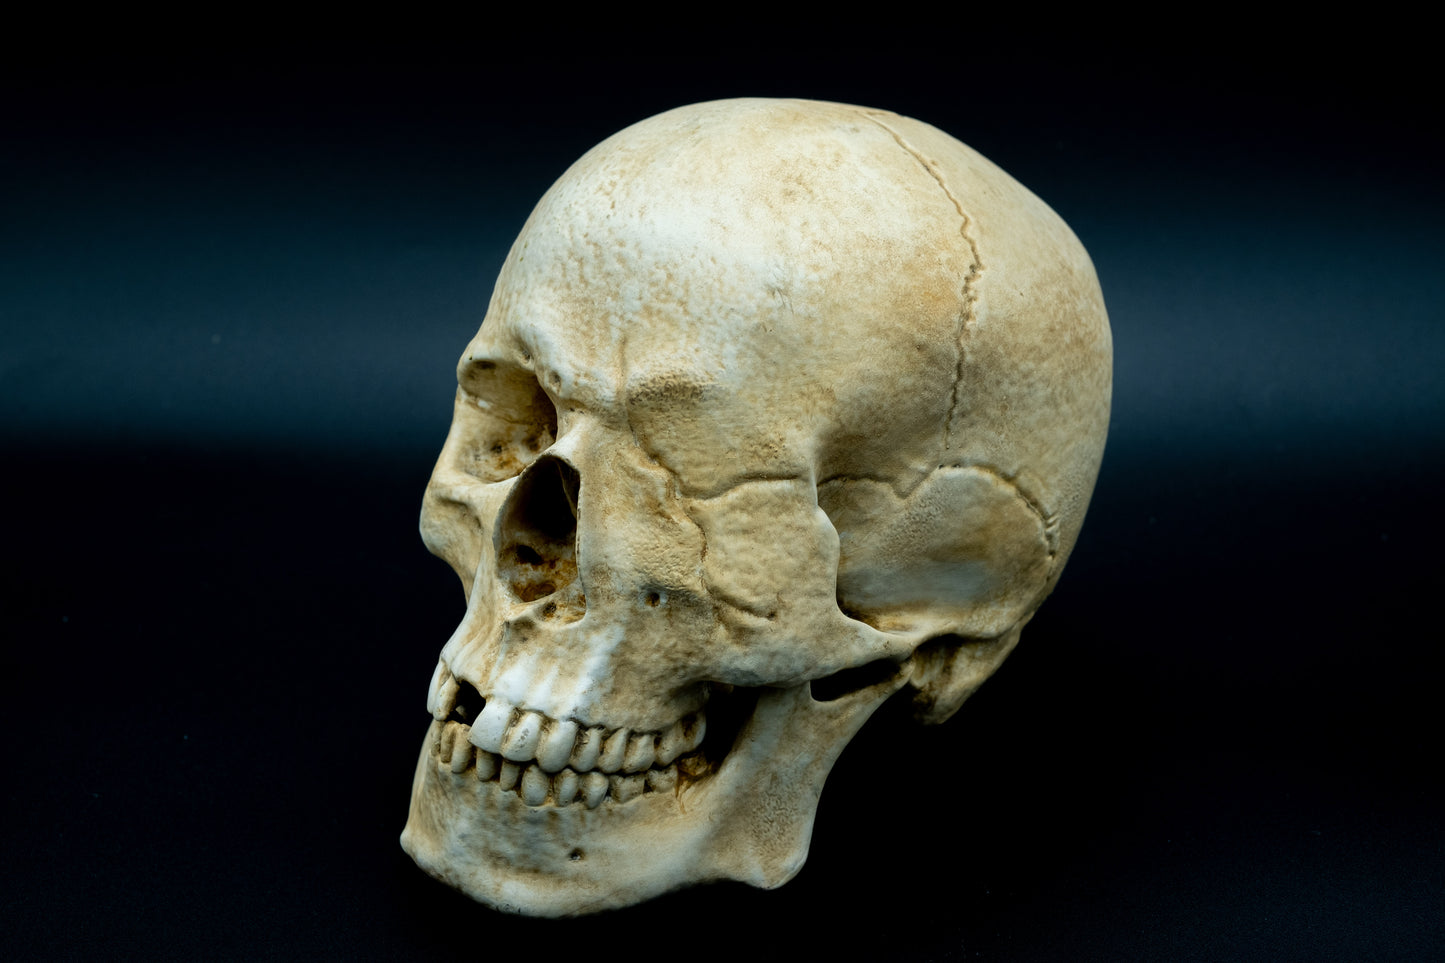 One-Eyed Willy Skull Replica The Goonies